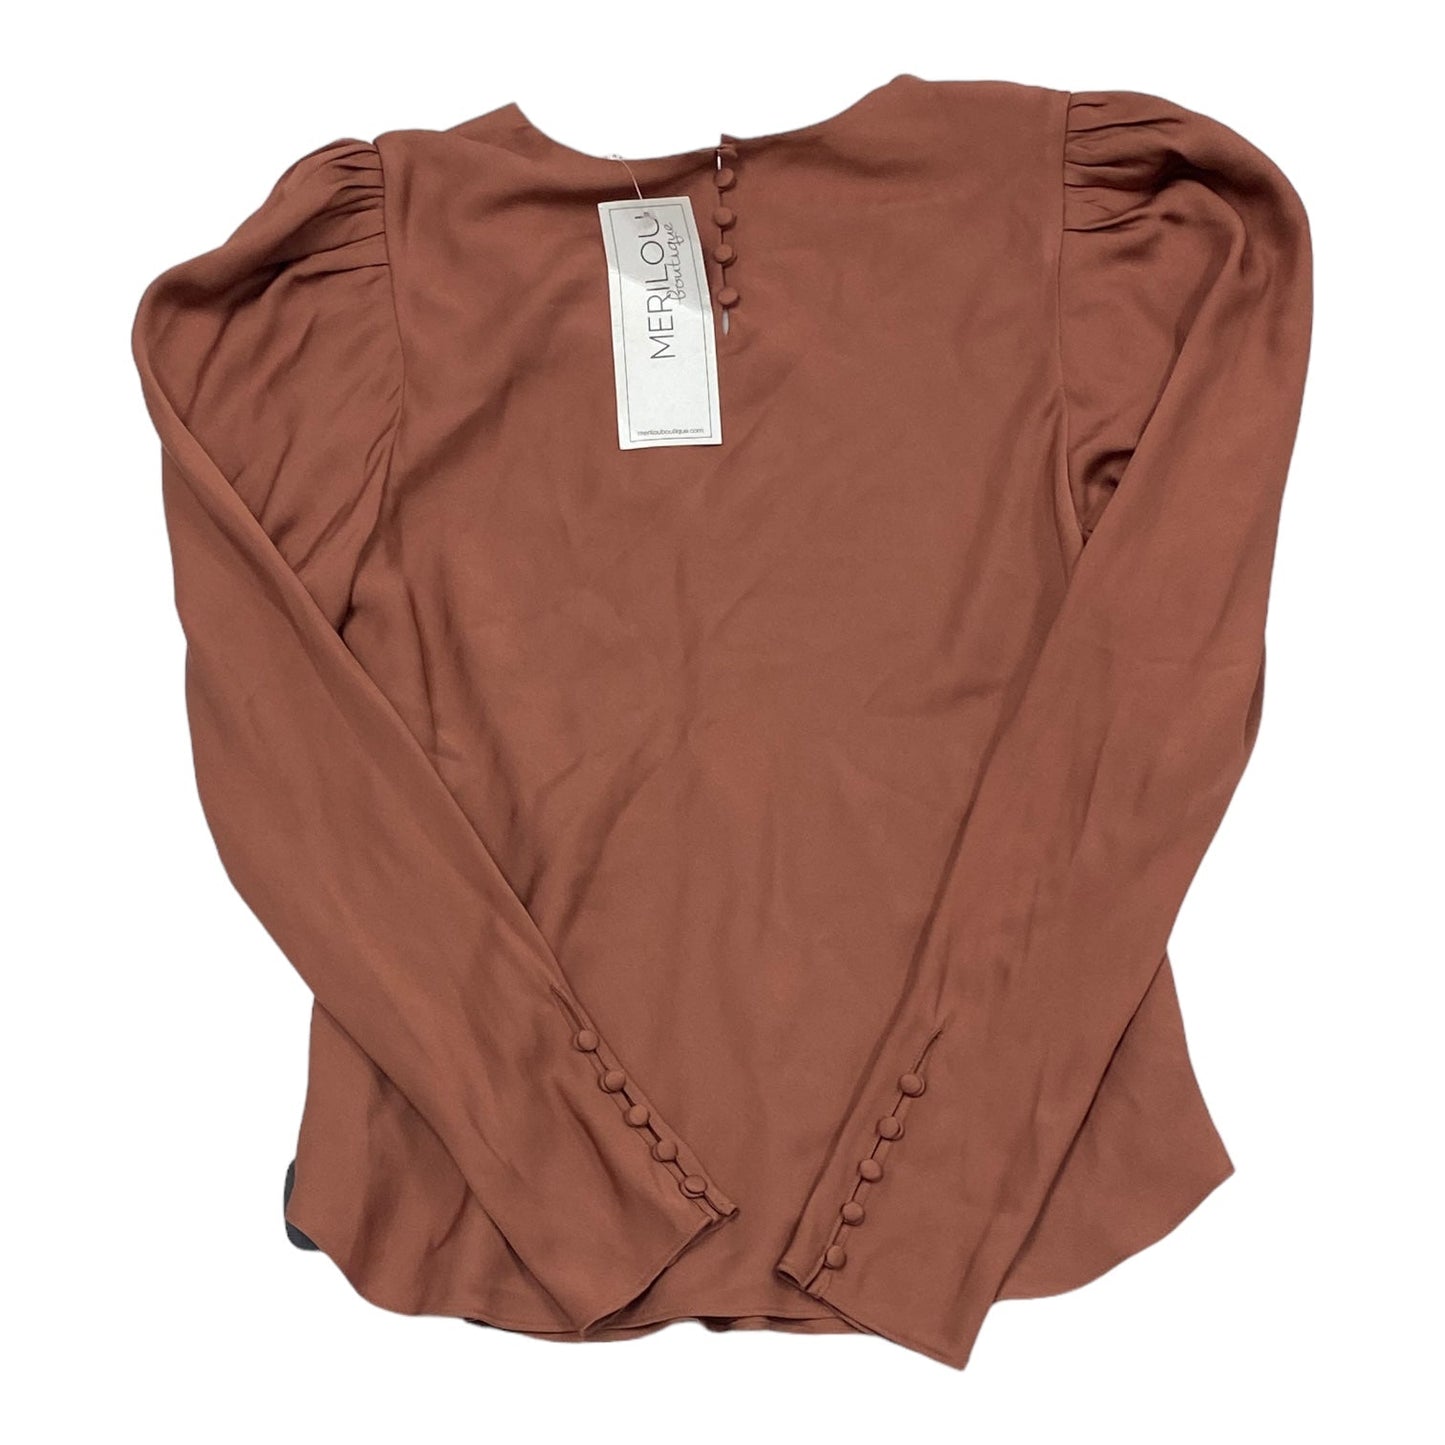 Copper Top Long Sleeve Frame, Size M